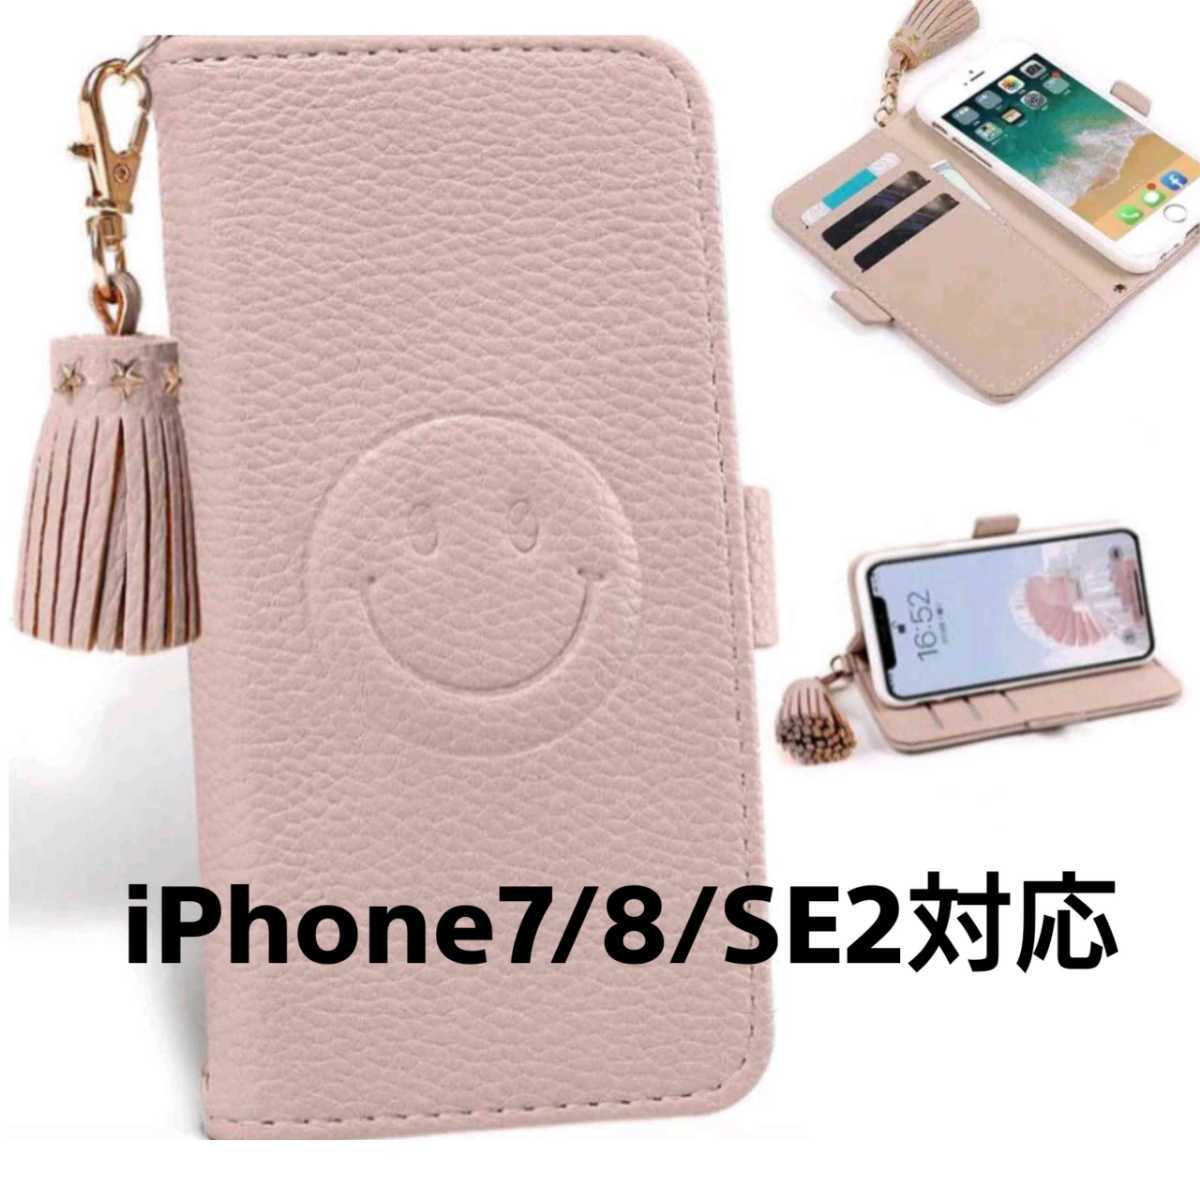  remainder a little new goods Smile .. Chan notebook type leather iPhone case charm attaching great popularity immediately buy OK stock limit [ price cut un- possible ]